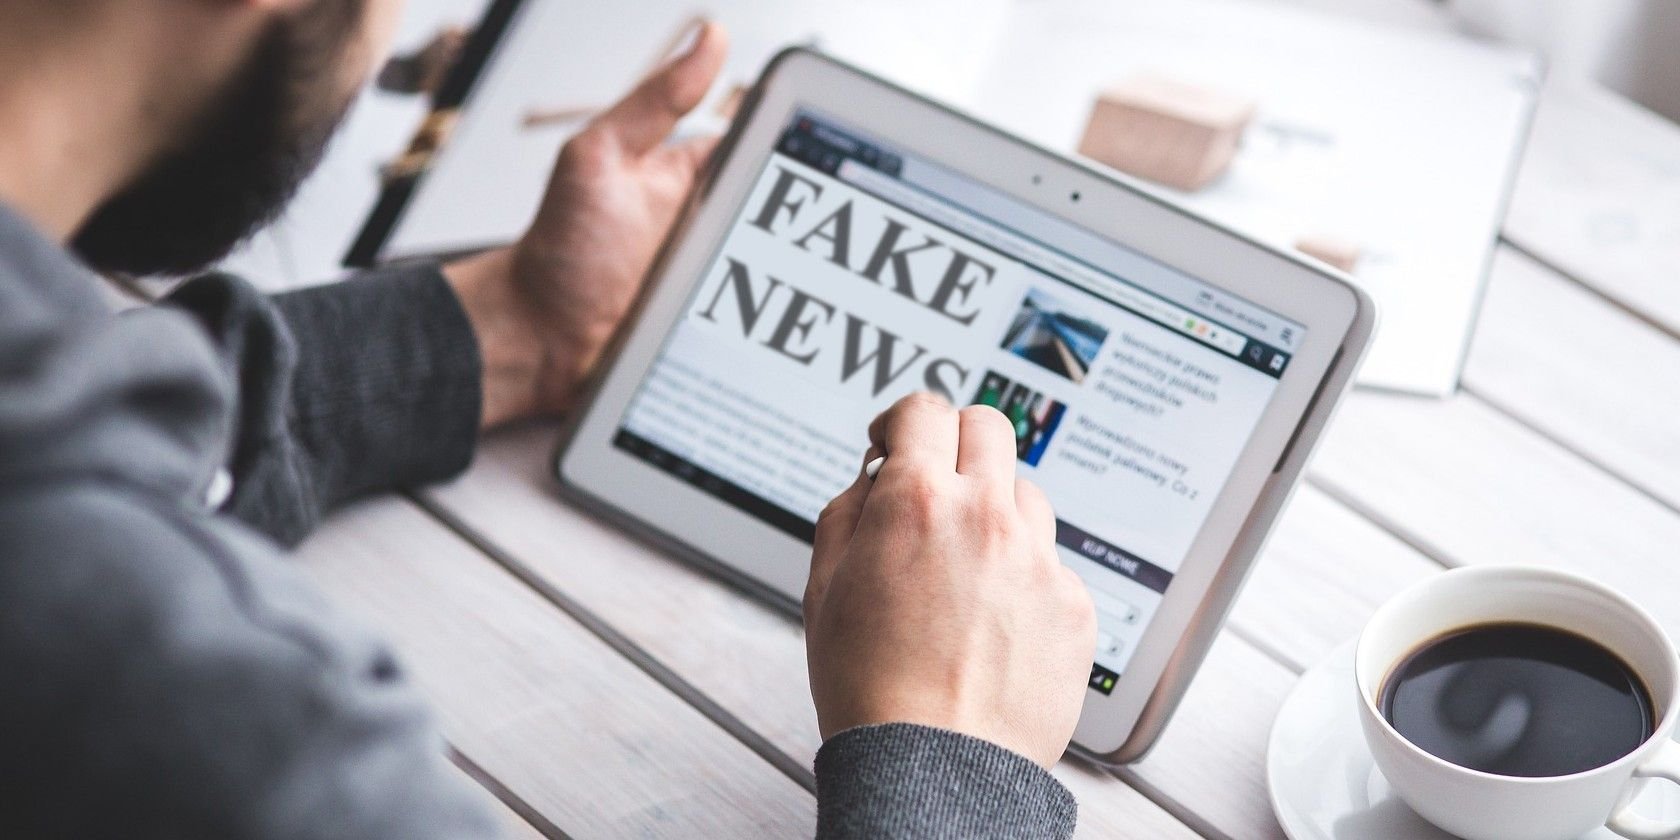 How to Avoid Seeing Fake News on Social Media